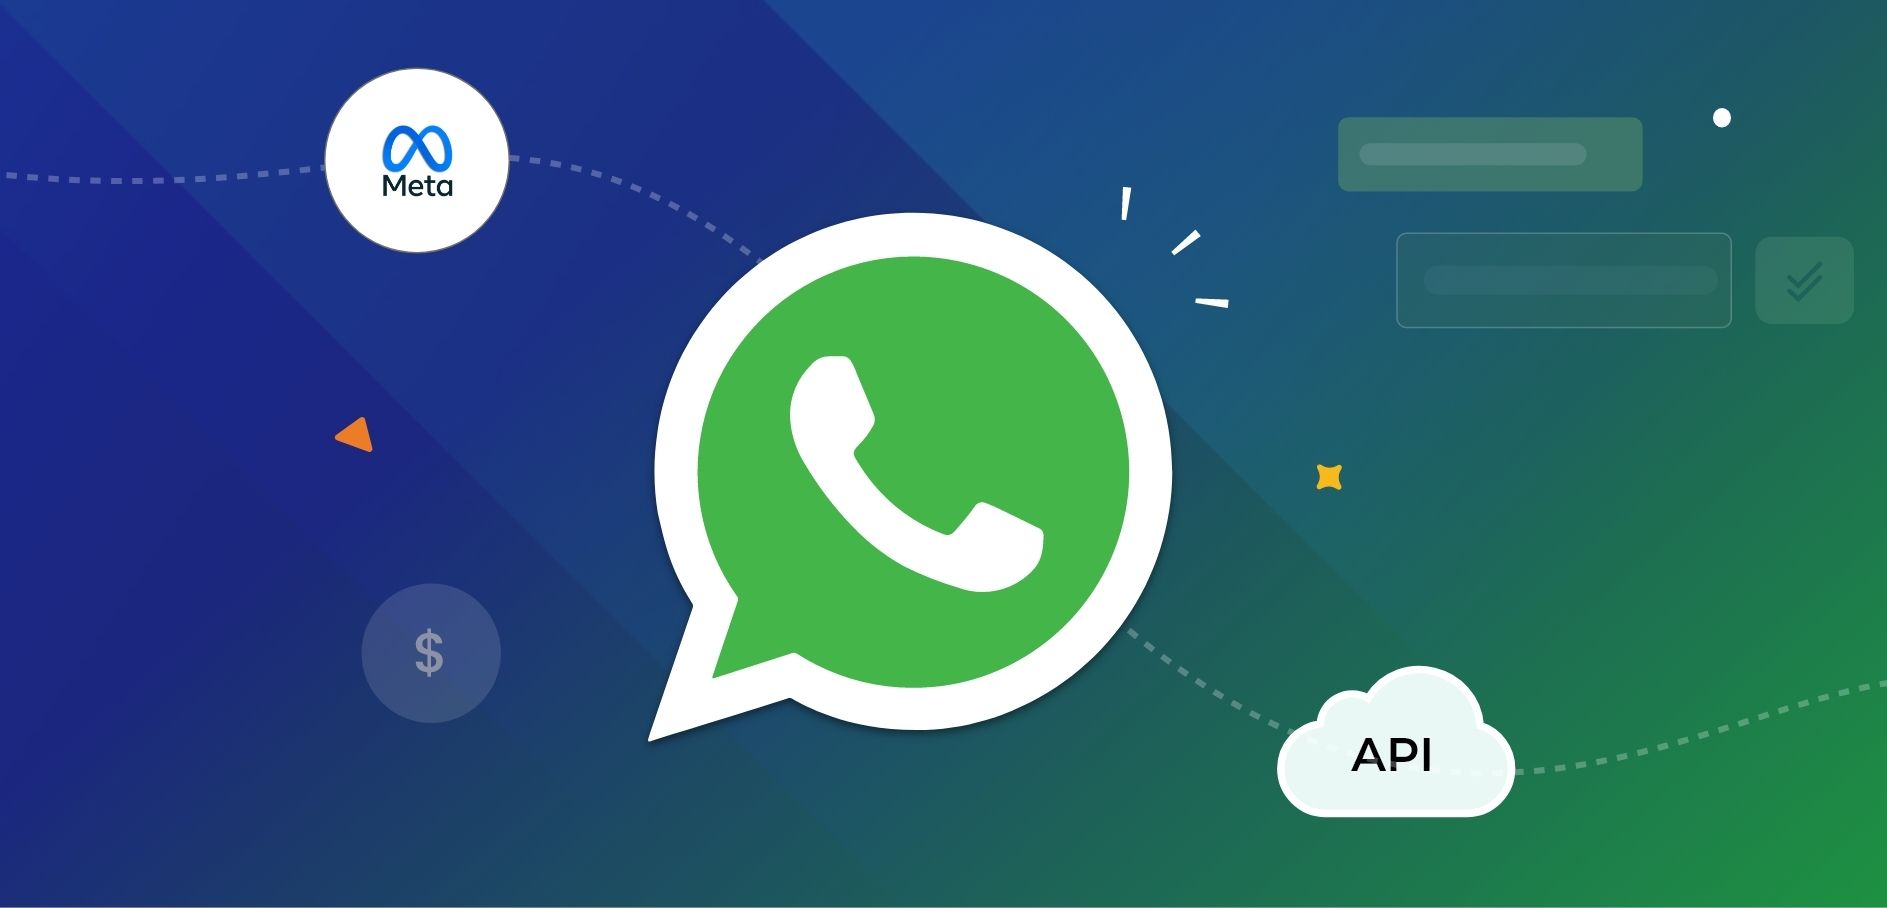 Does Whatsapp Api Pricing Is Recommendable For Small Business?